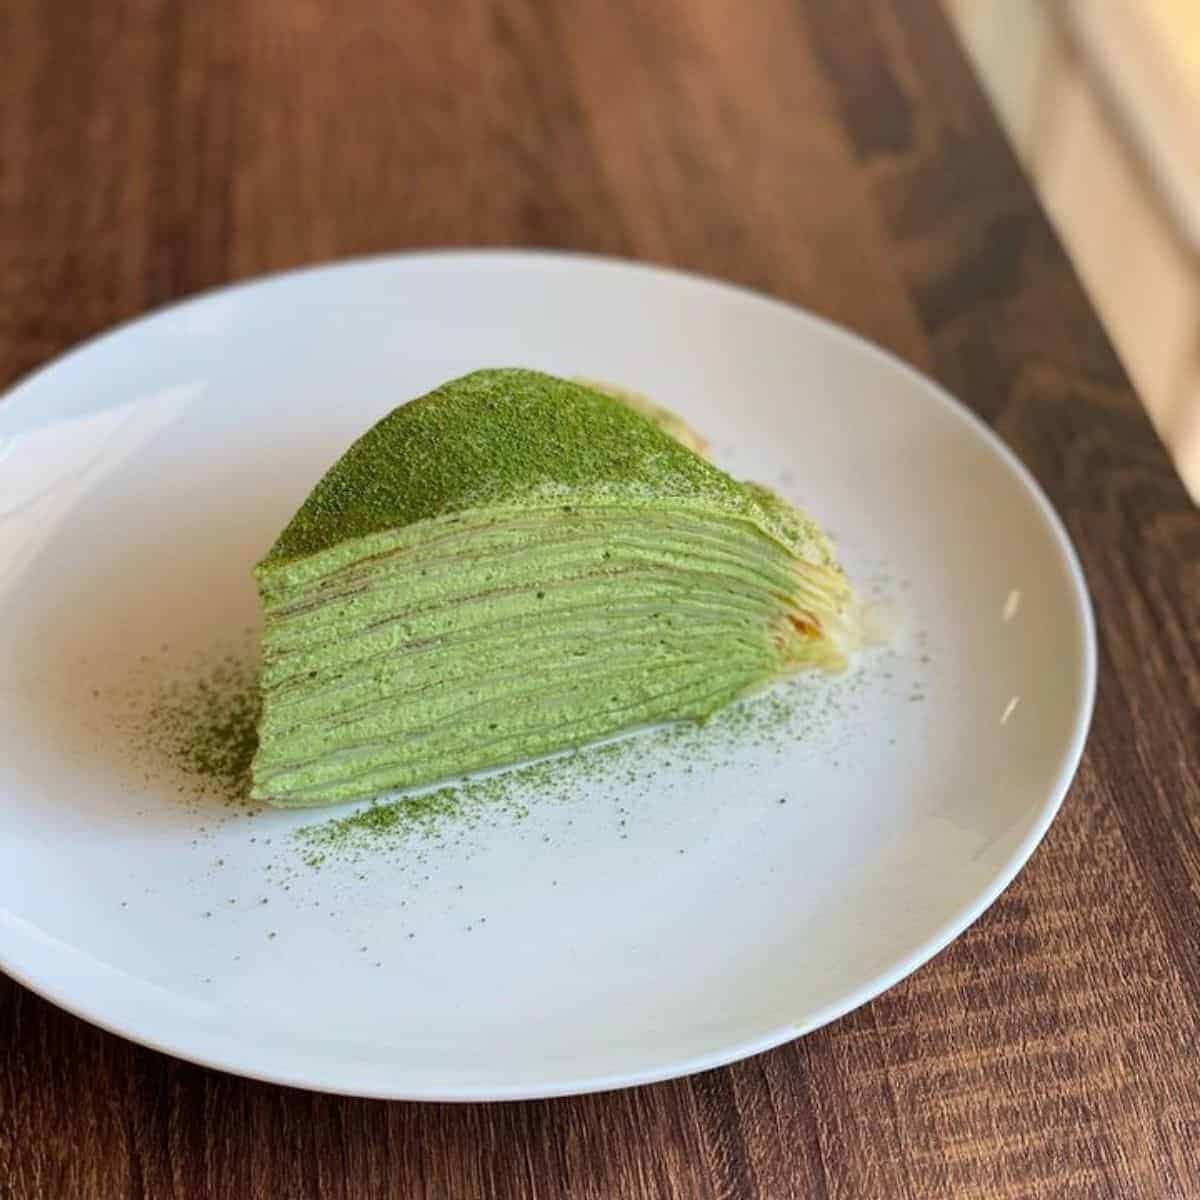 Tempting slice of a Green Tea Crepe Cake with a smooth and soft texture in a curved design